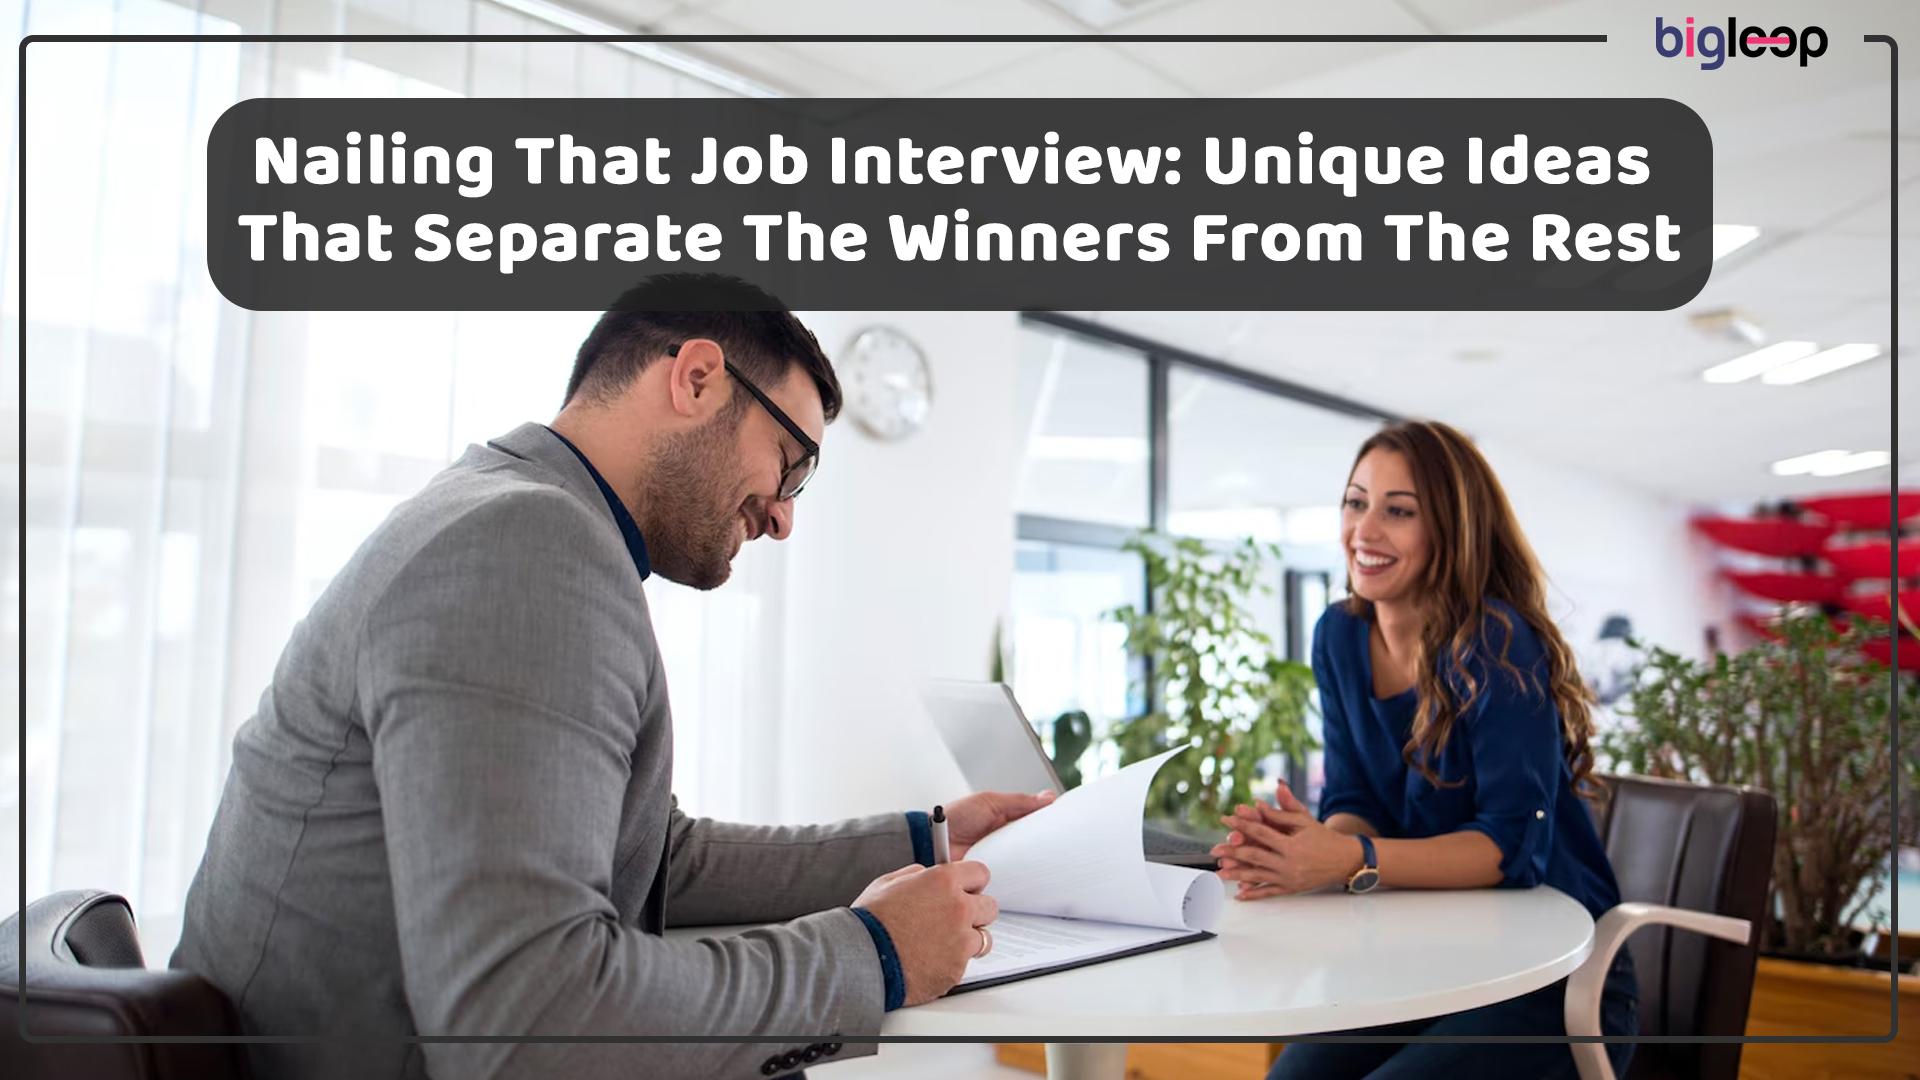 Nailing That Job Interview: Unique Ideas That Separate The Winners From The Rest